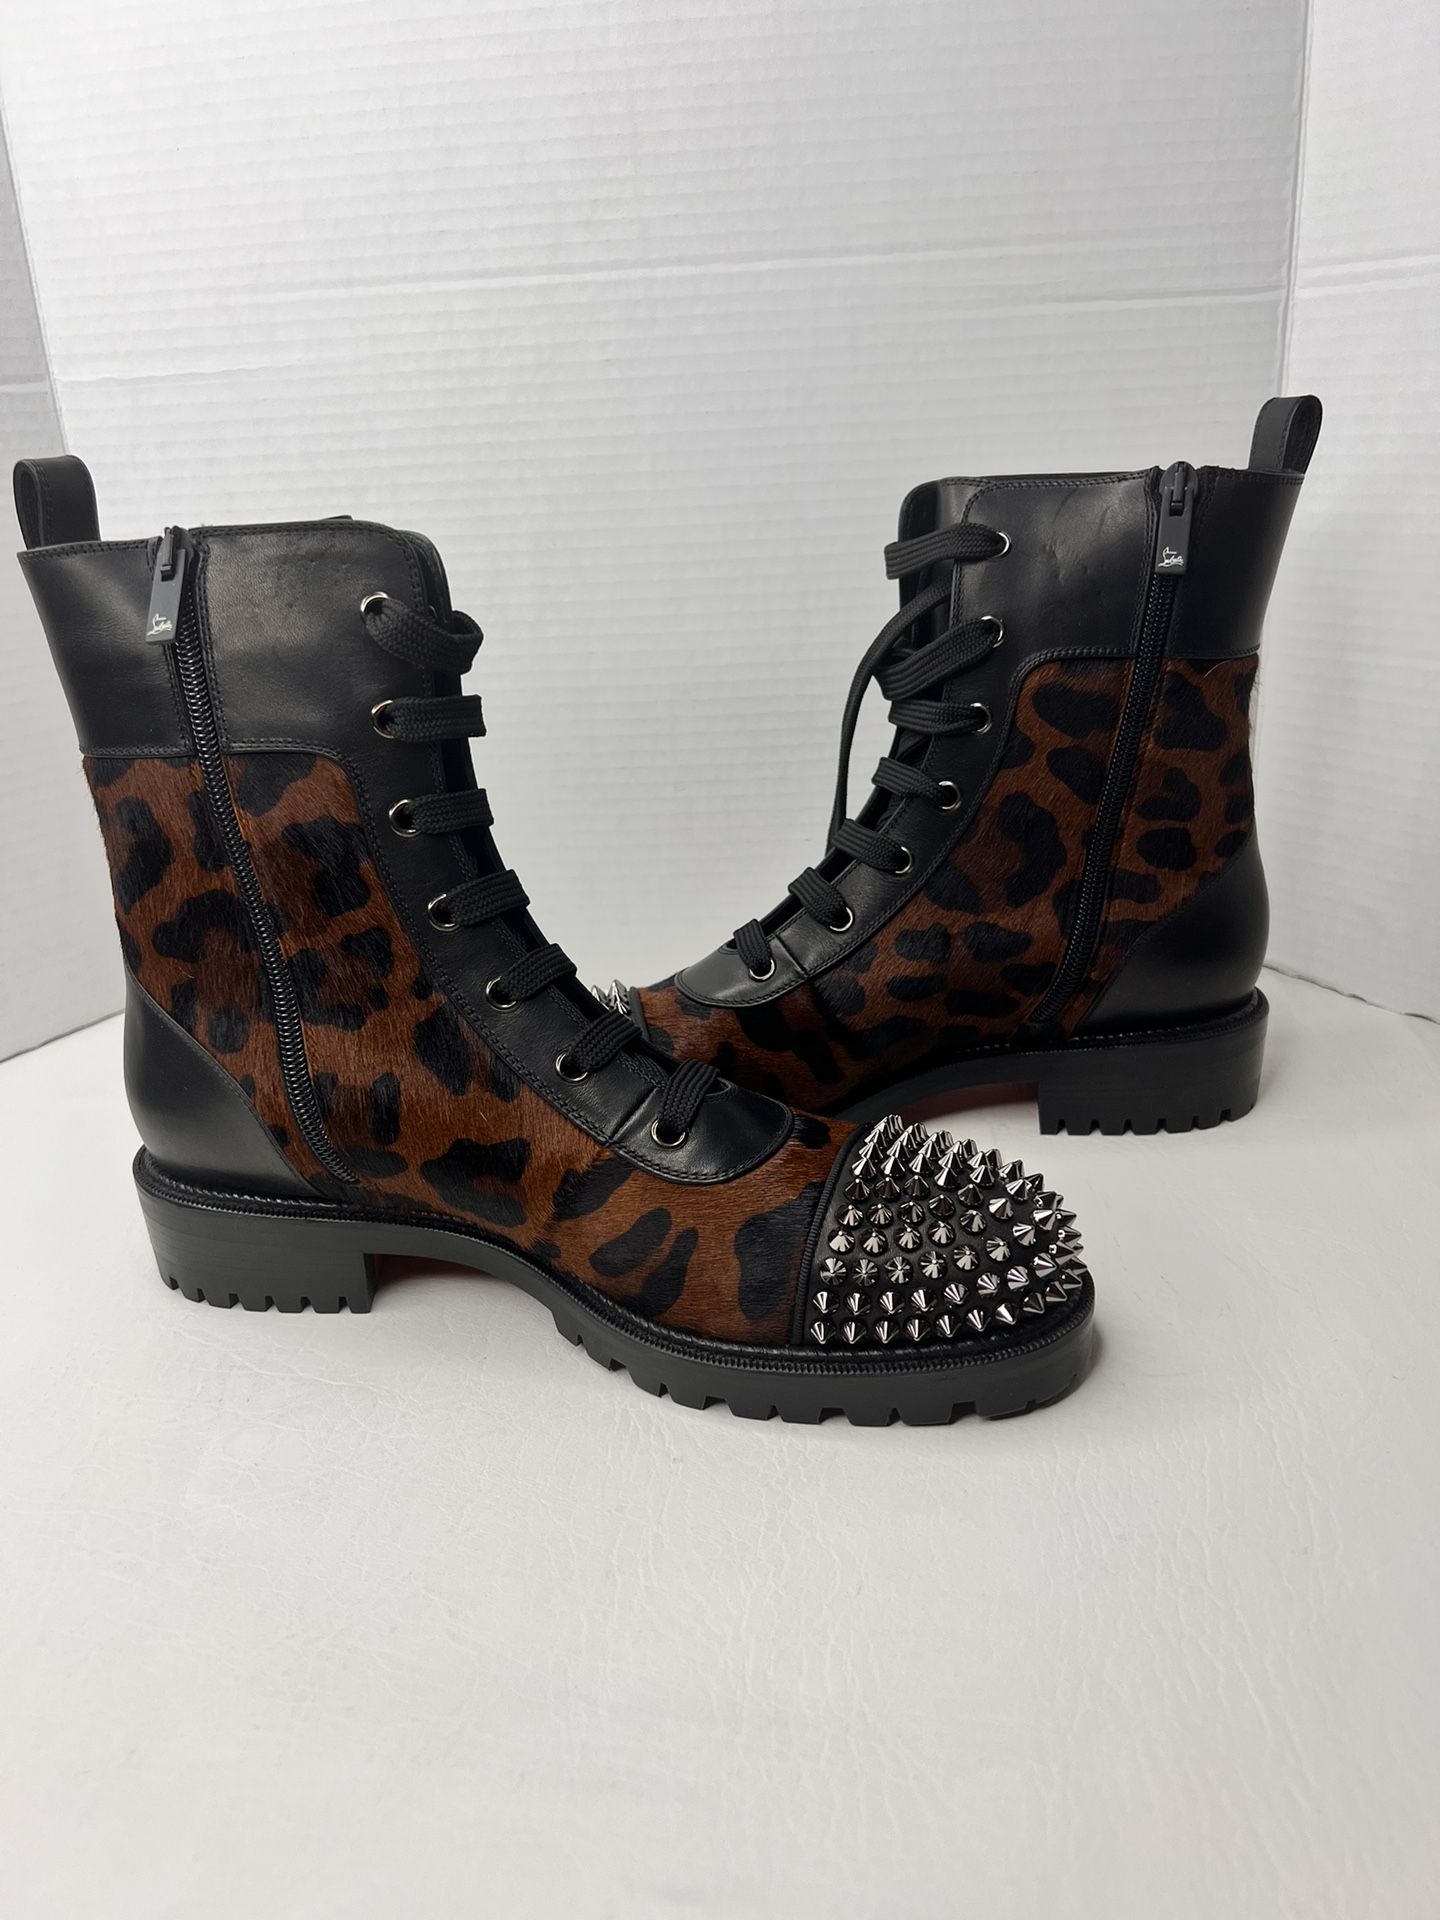 NEW Christian Louboutin Leopard Calf Hair Spiked Booties Size 39/9